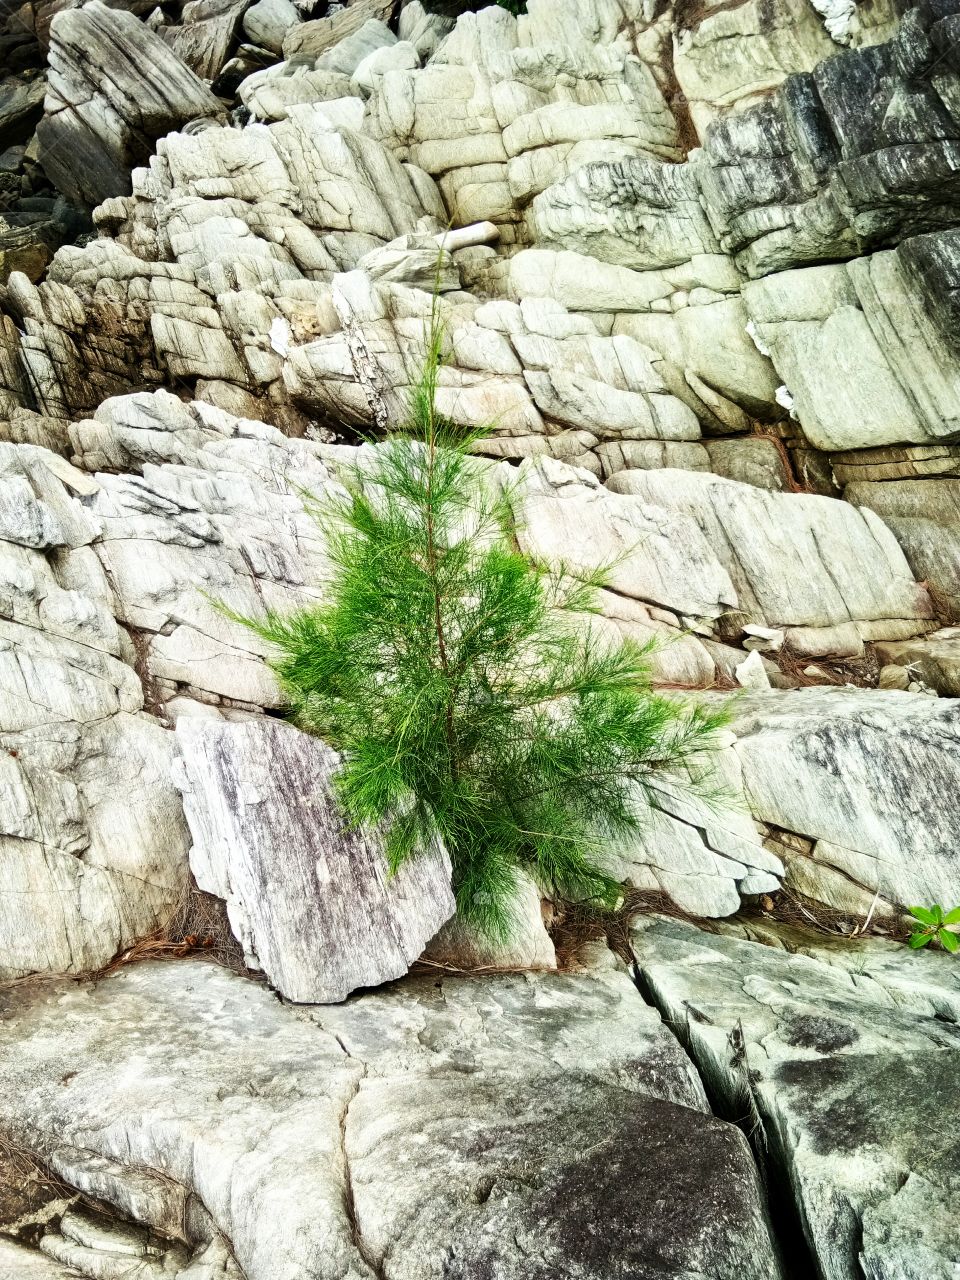 The tree is on the rocks.